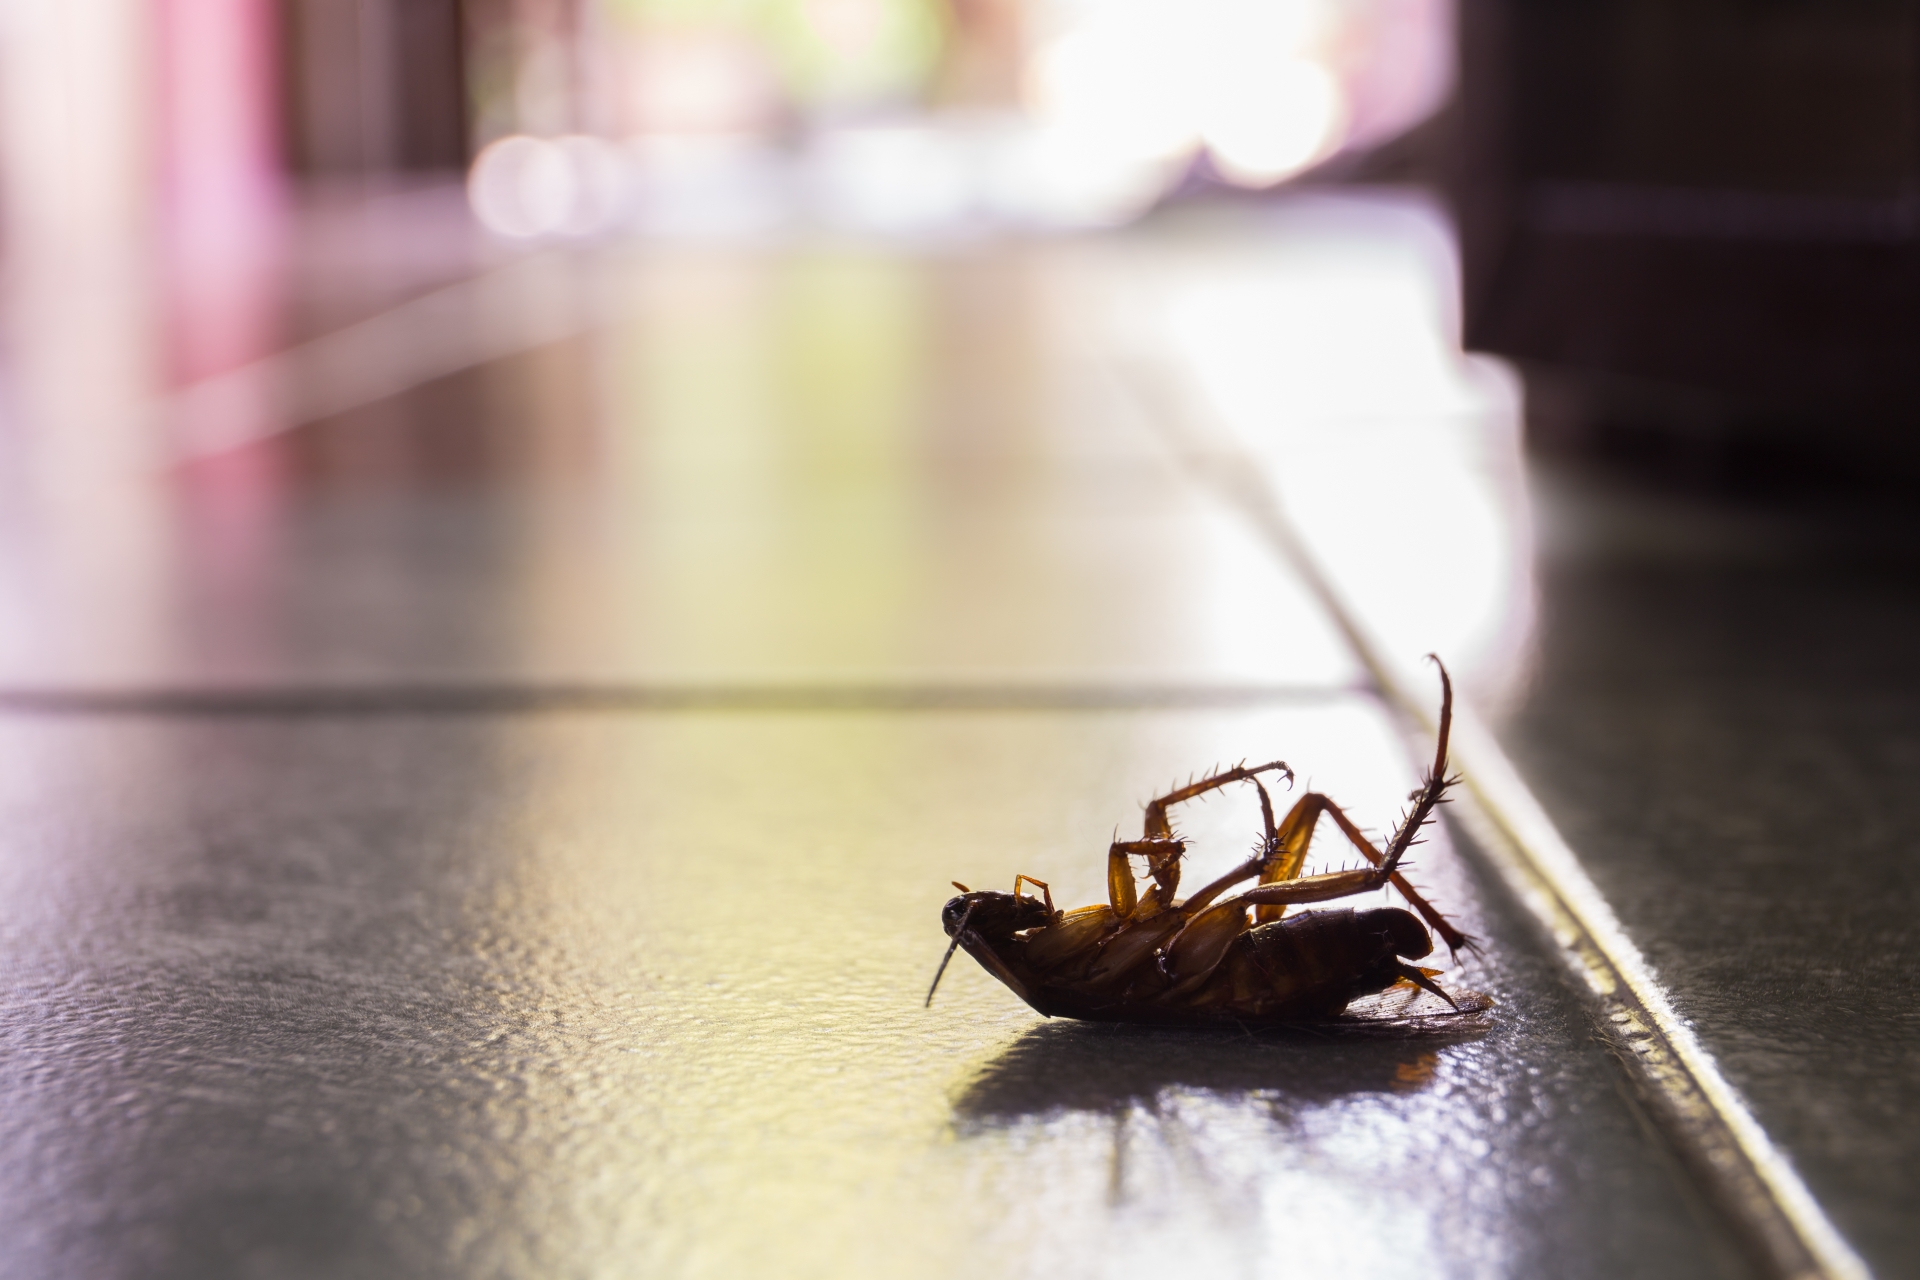 Cockroach Control, Pest Control in Barkingside, Hainault, IG6. Call Now 020 8166 9746